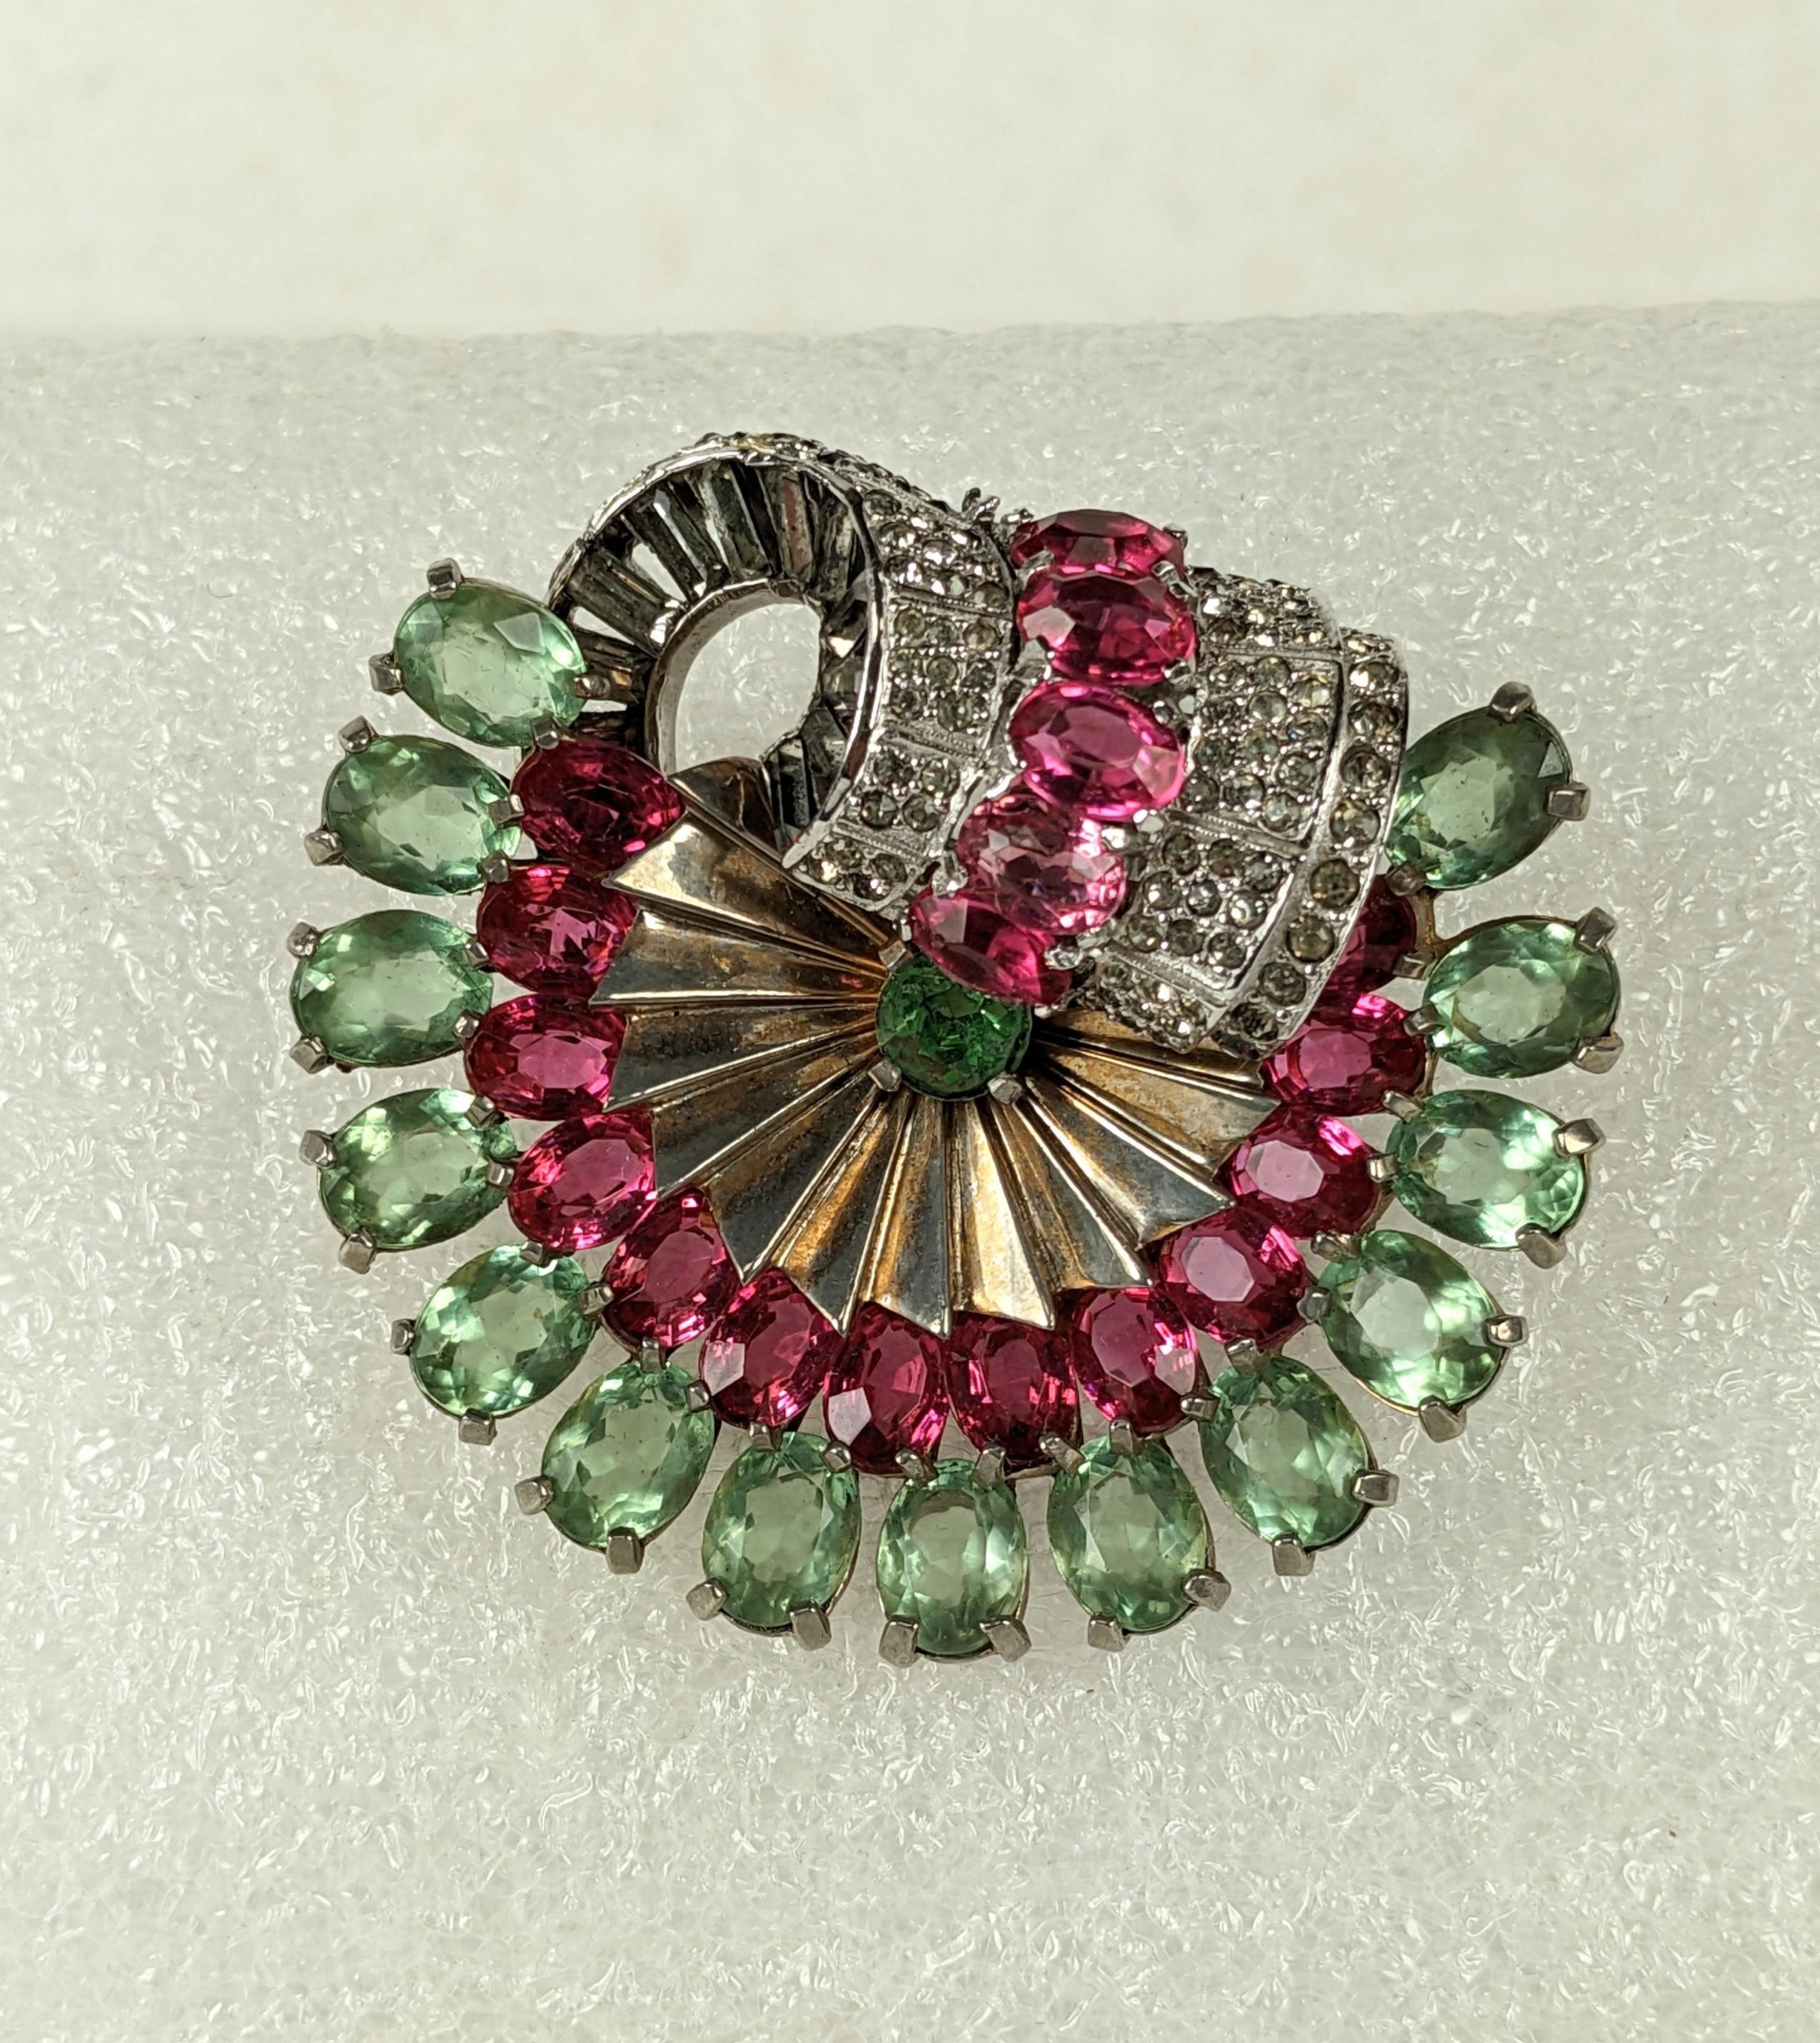 Mazer Retro Pink Green Clip Brooch from the 1940's. Typically Retro design with a pave baguette swirl with oval cut pastes in pink and pale green. Signed Mazer, 1940's USA. 2